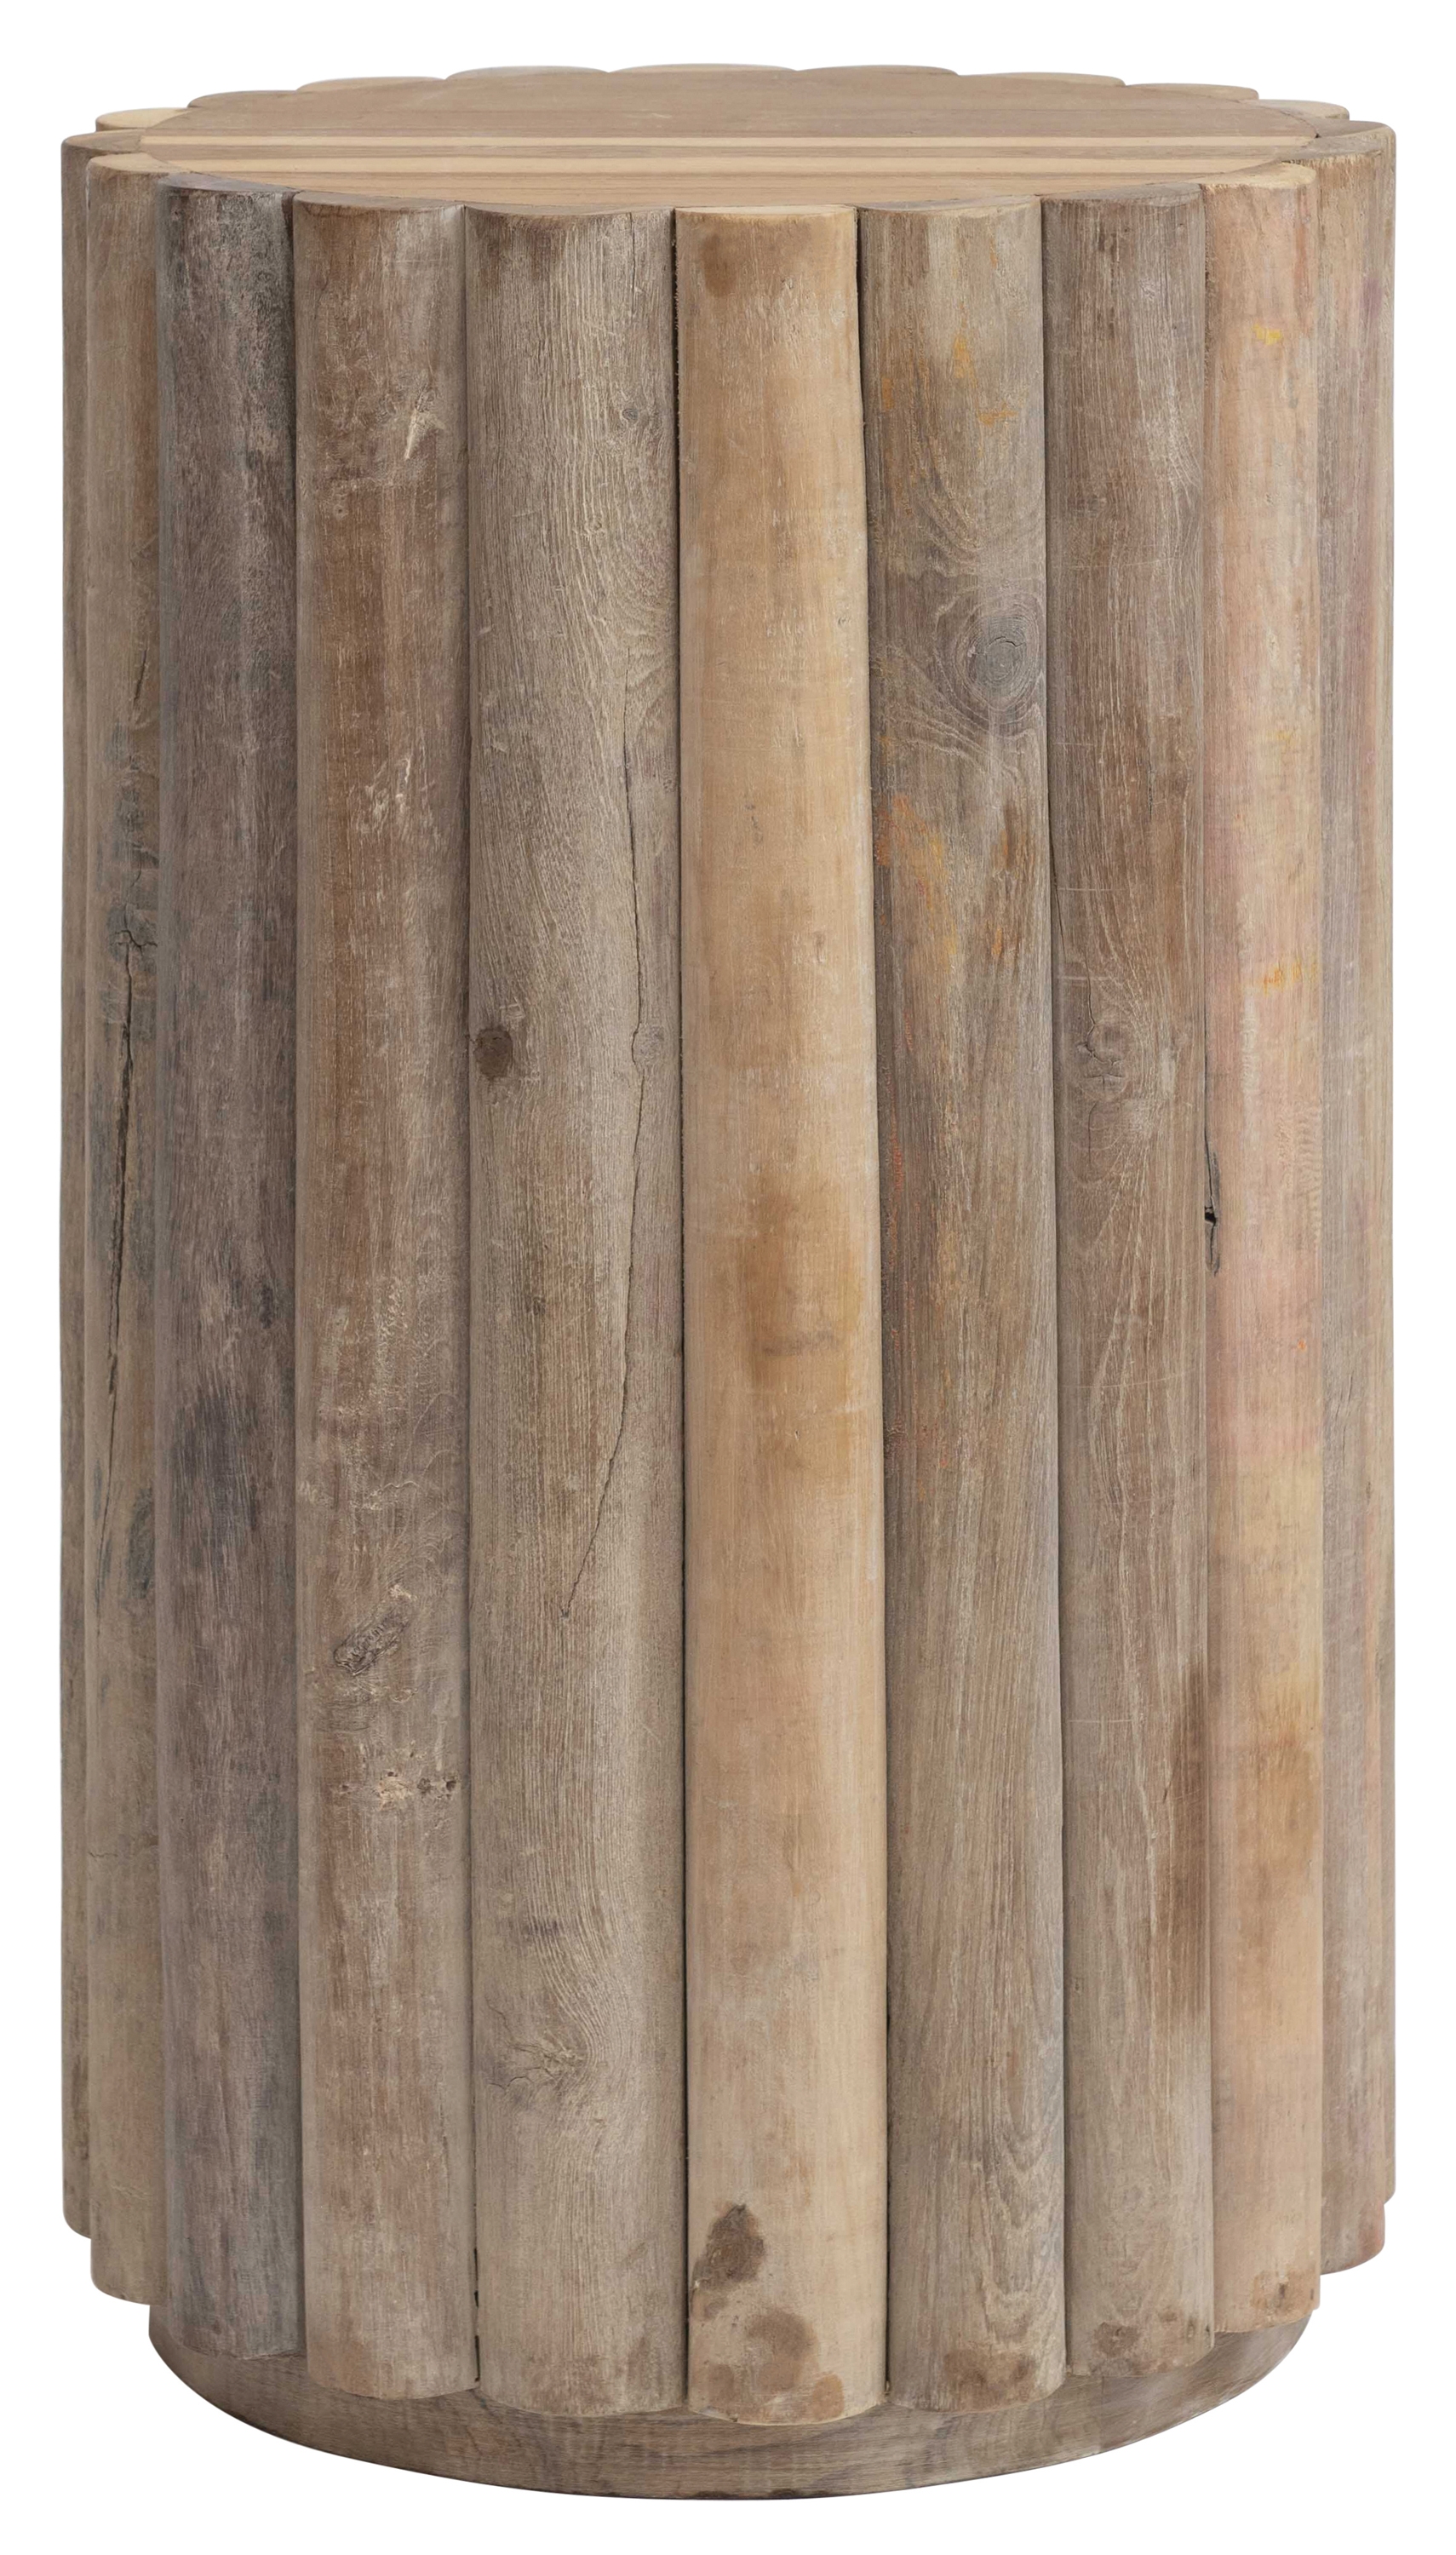 16"R x 28"H Reclaimed Wood Pedestal/Table with Half-Round Onlays (Each one will vary) - Image 0